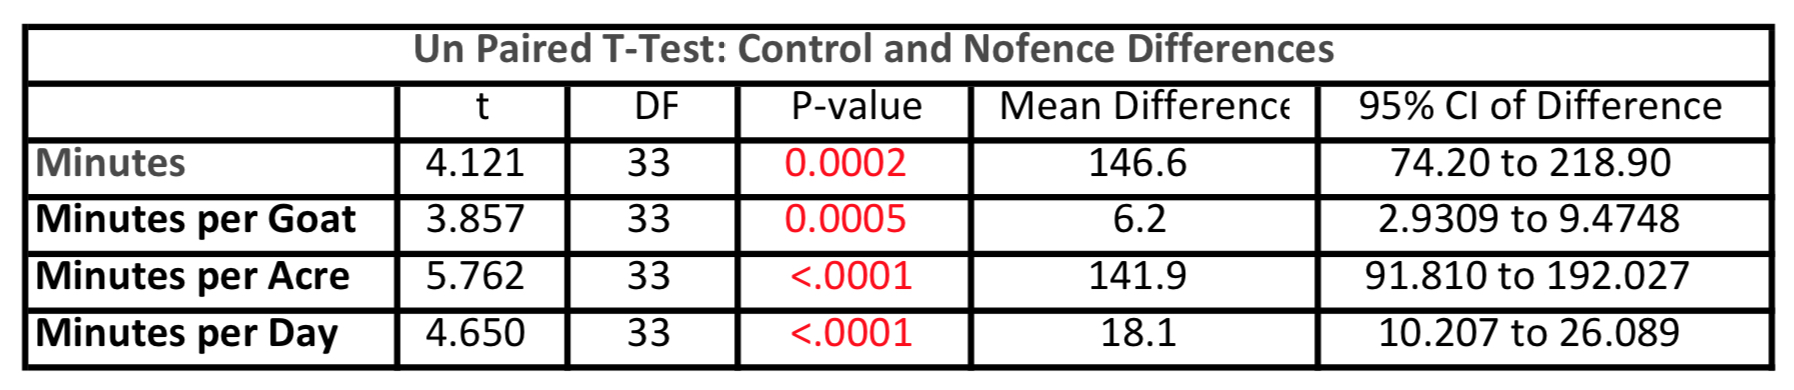 Unpaired t test: Control and Nofence Differences